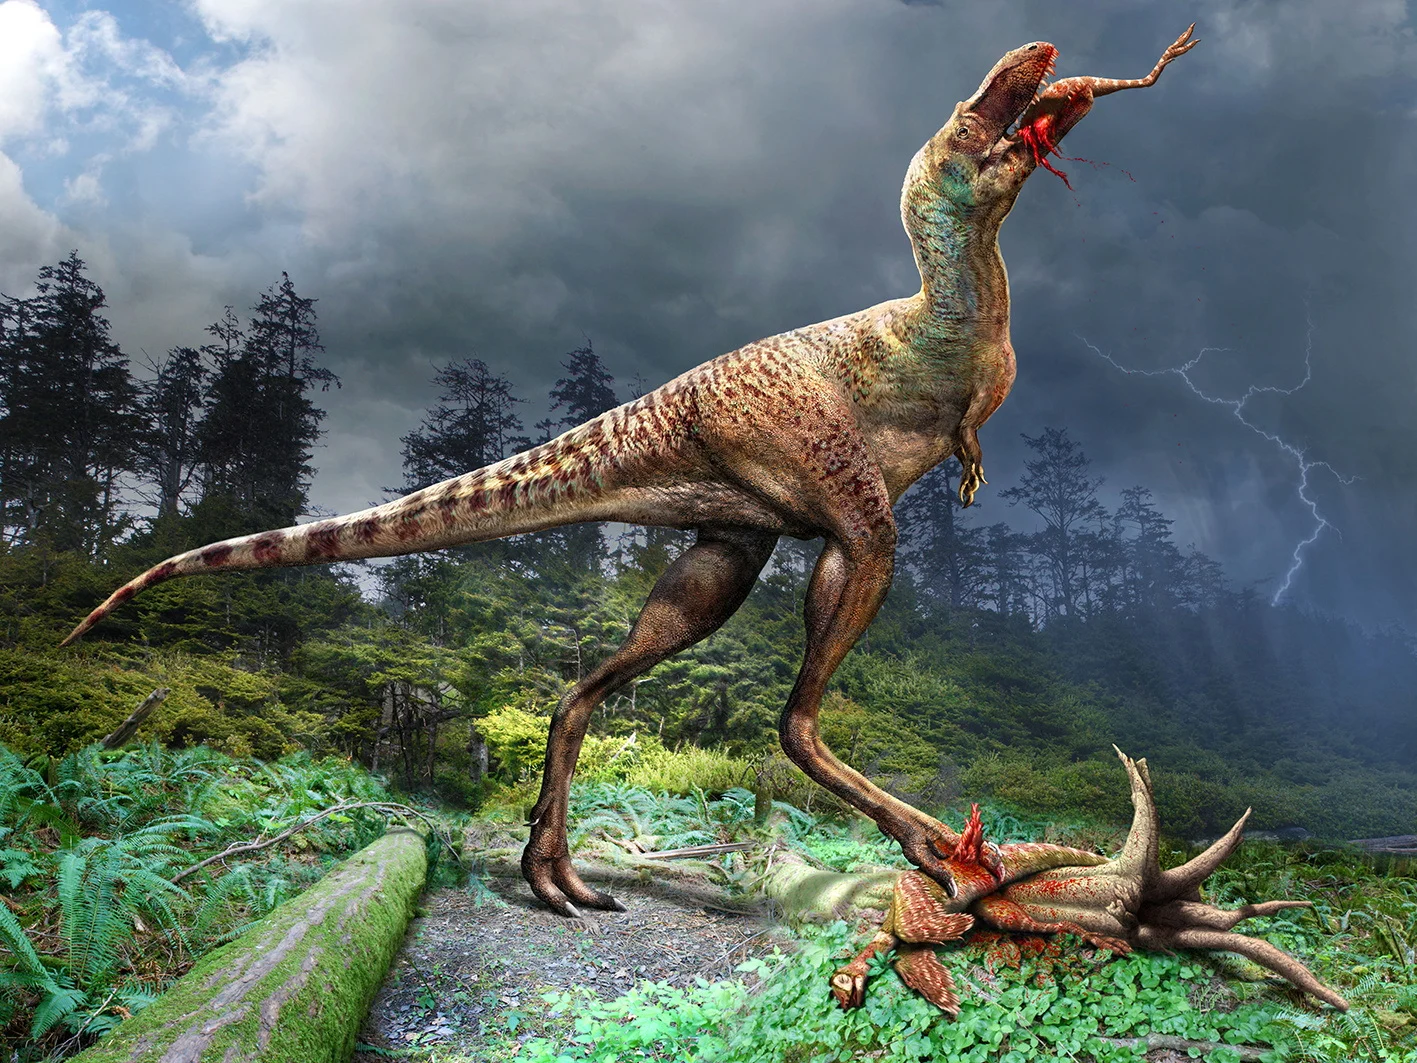 REUTERS: A juvenile Gorgosaurus, a meat-eating dinosaur that lived 75 million years ago during the Cretaceous Period in what is now Canada's Alberta province, consumes a small dinosaur called Citipes in this illustration obtained by Reuters on December 7, 2023. Julius Csotonyi and Royal Tyrrell Museum of Palaeontology/Handout via REUTERS